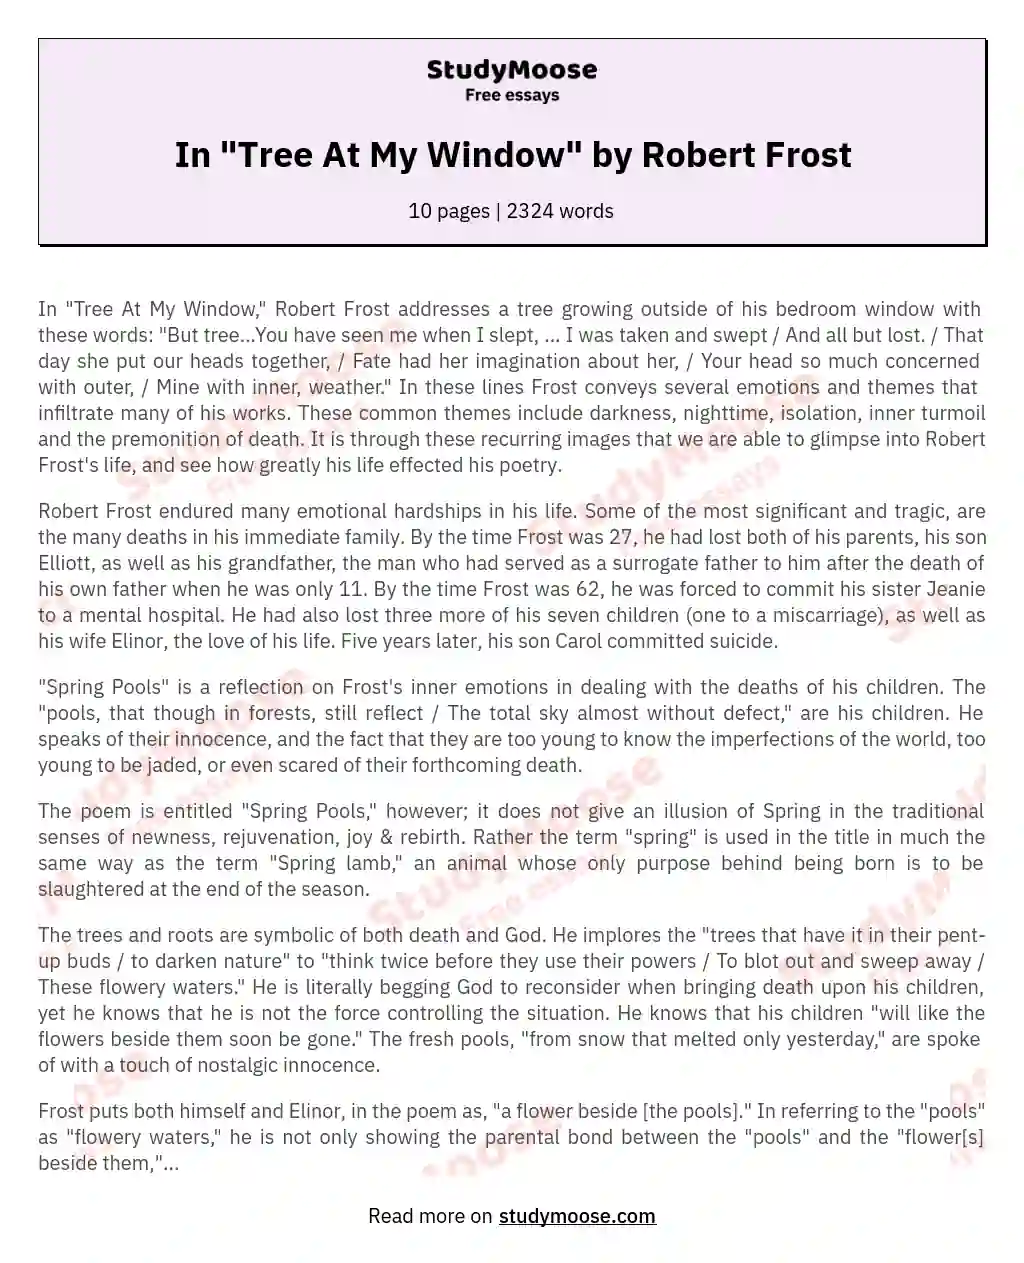 In "Tree At My Window" by Robert Frost